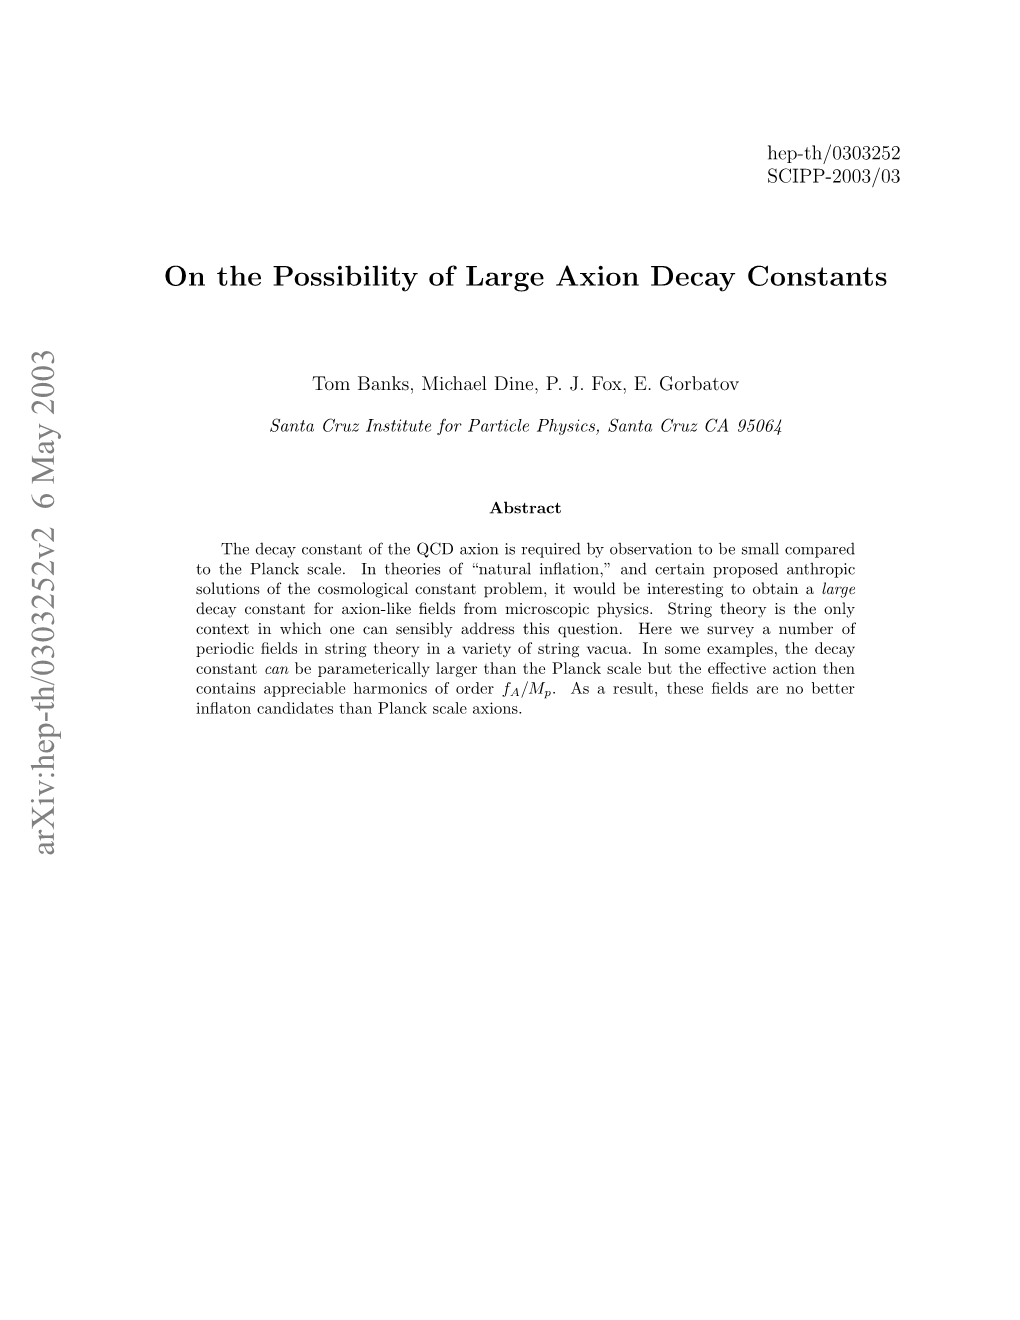 On the Possibility of Large Axion Decay Constants